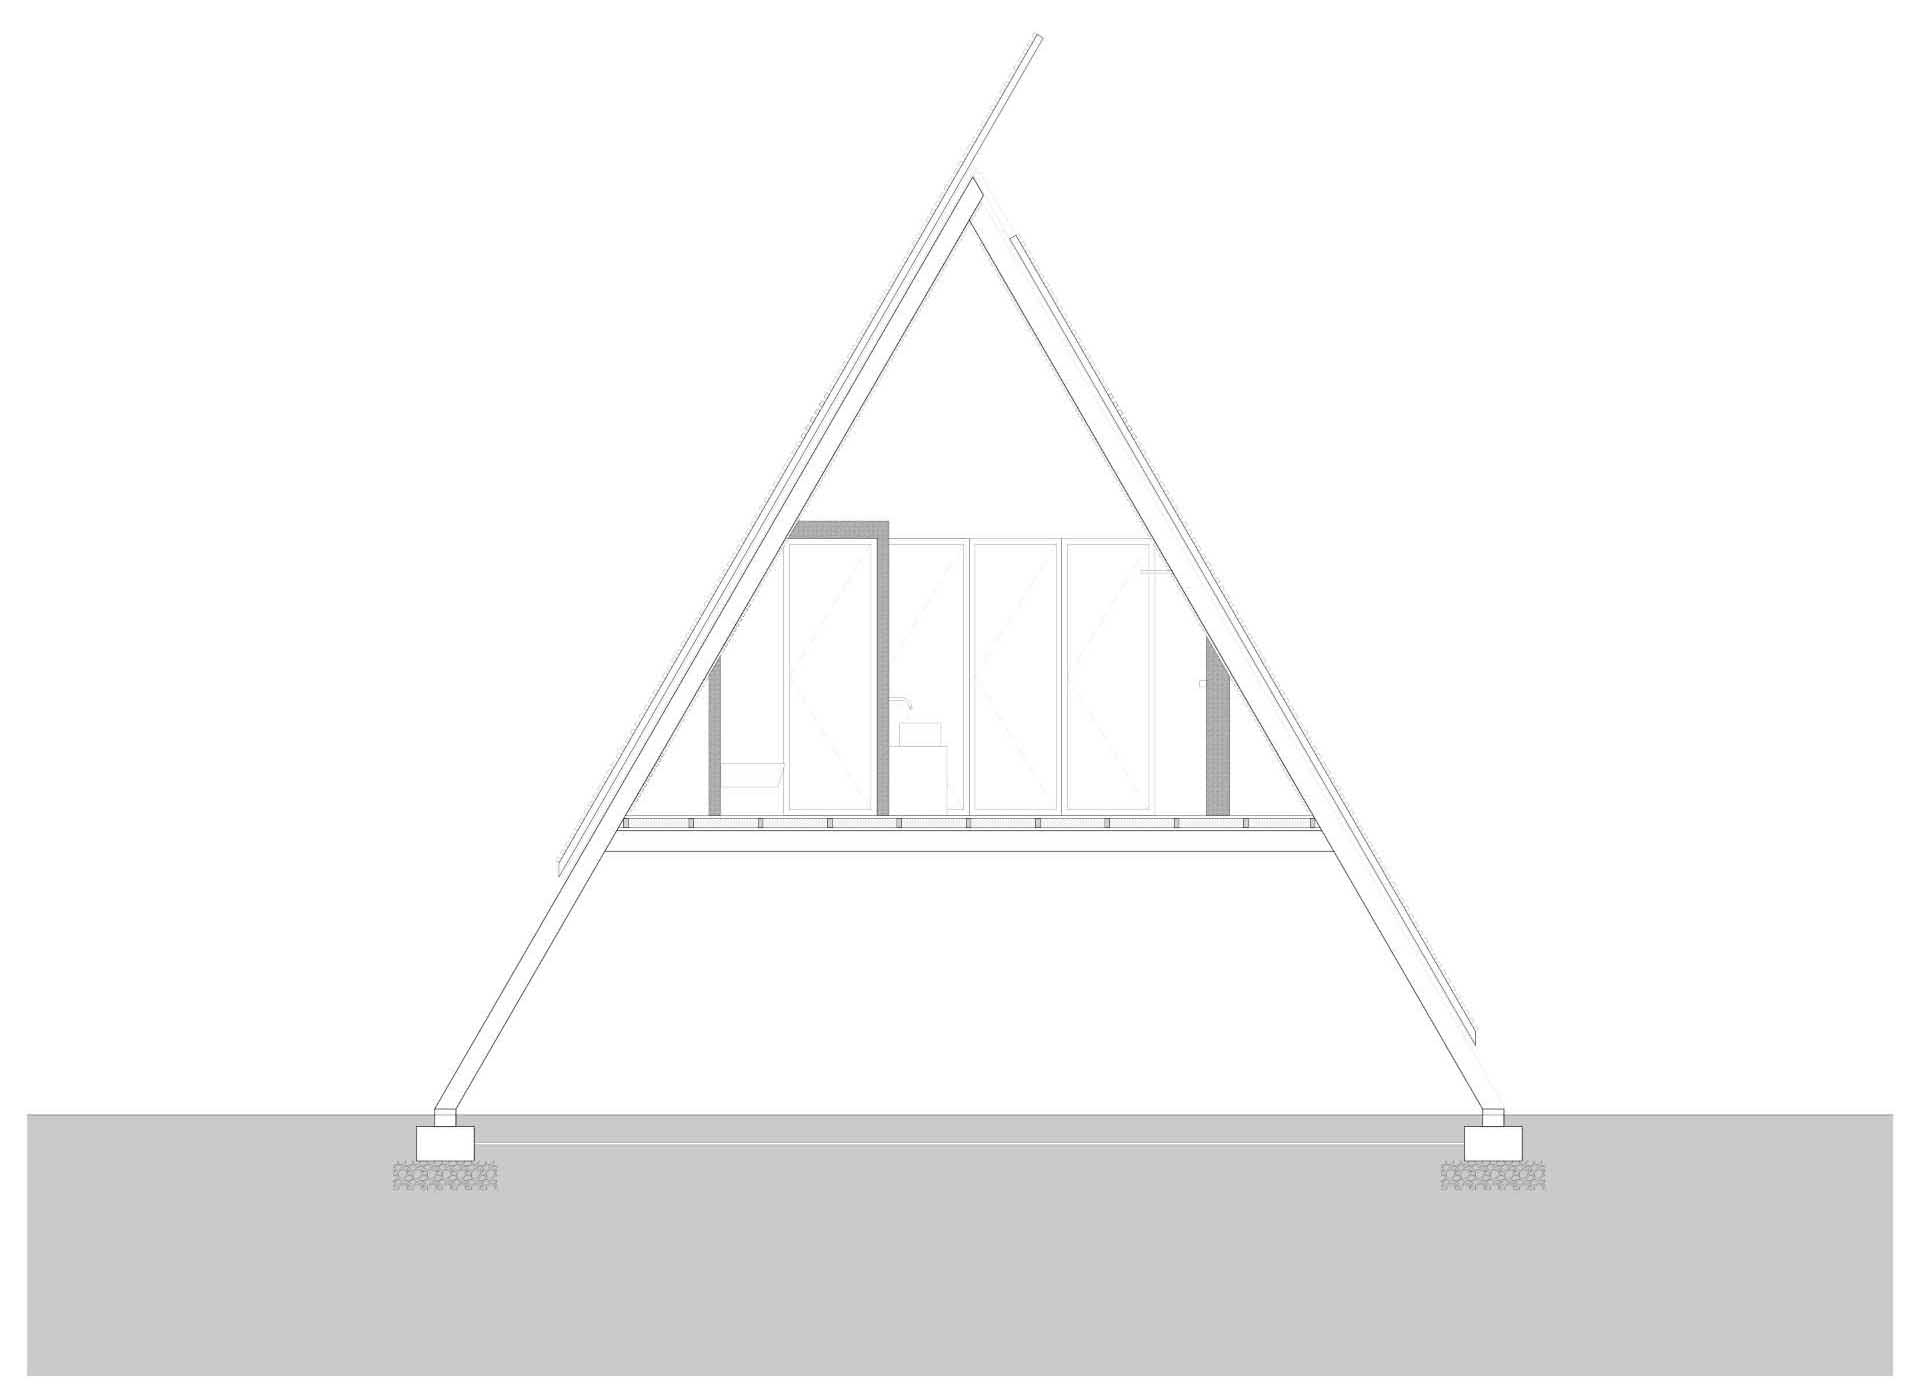 Architectural drawings and plans for a collection of A-frame cabins.